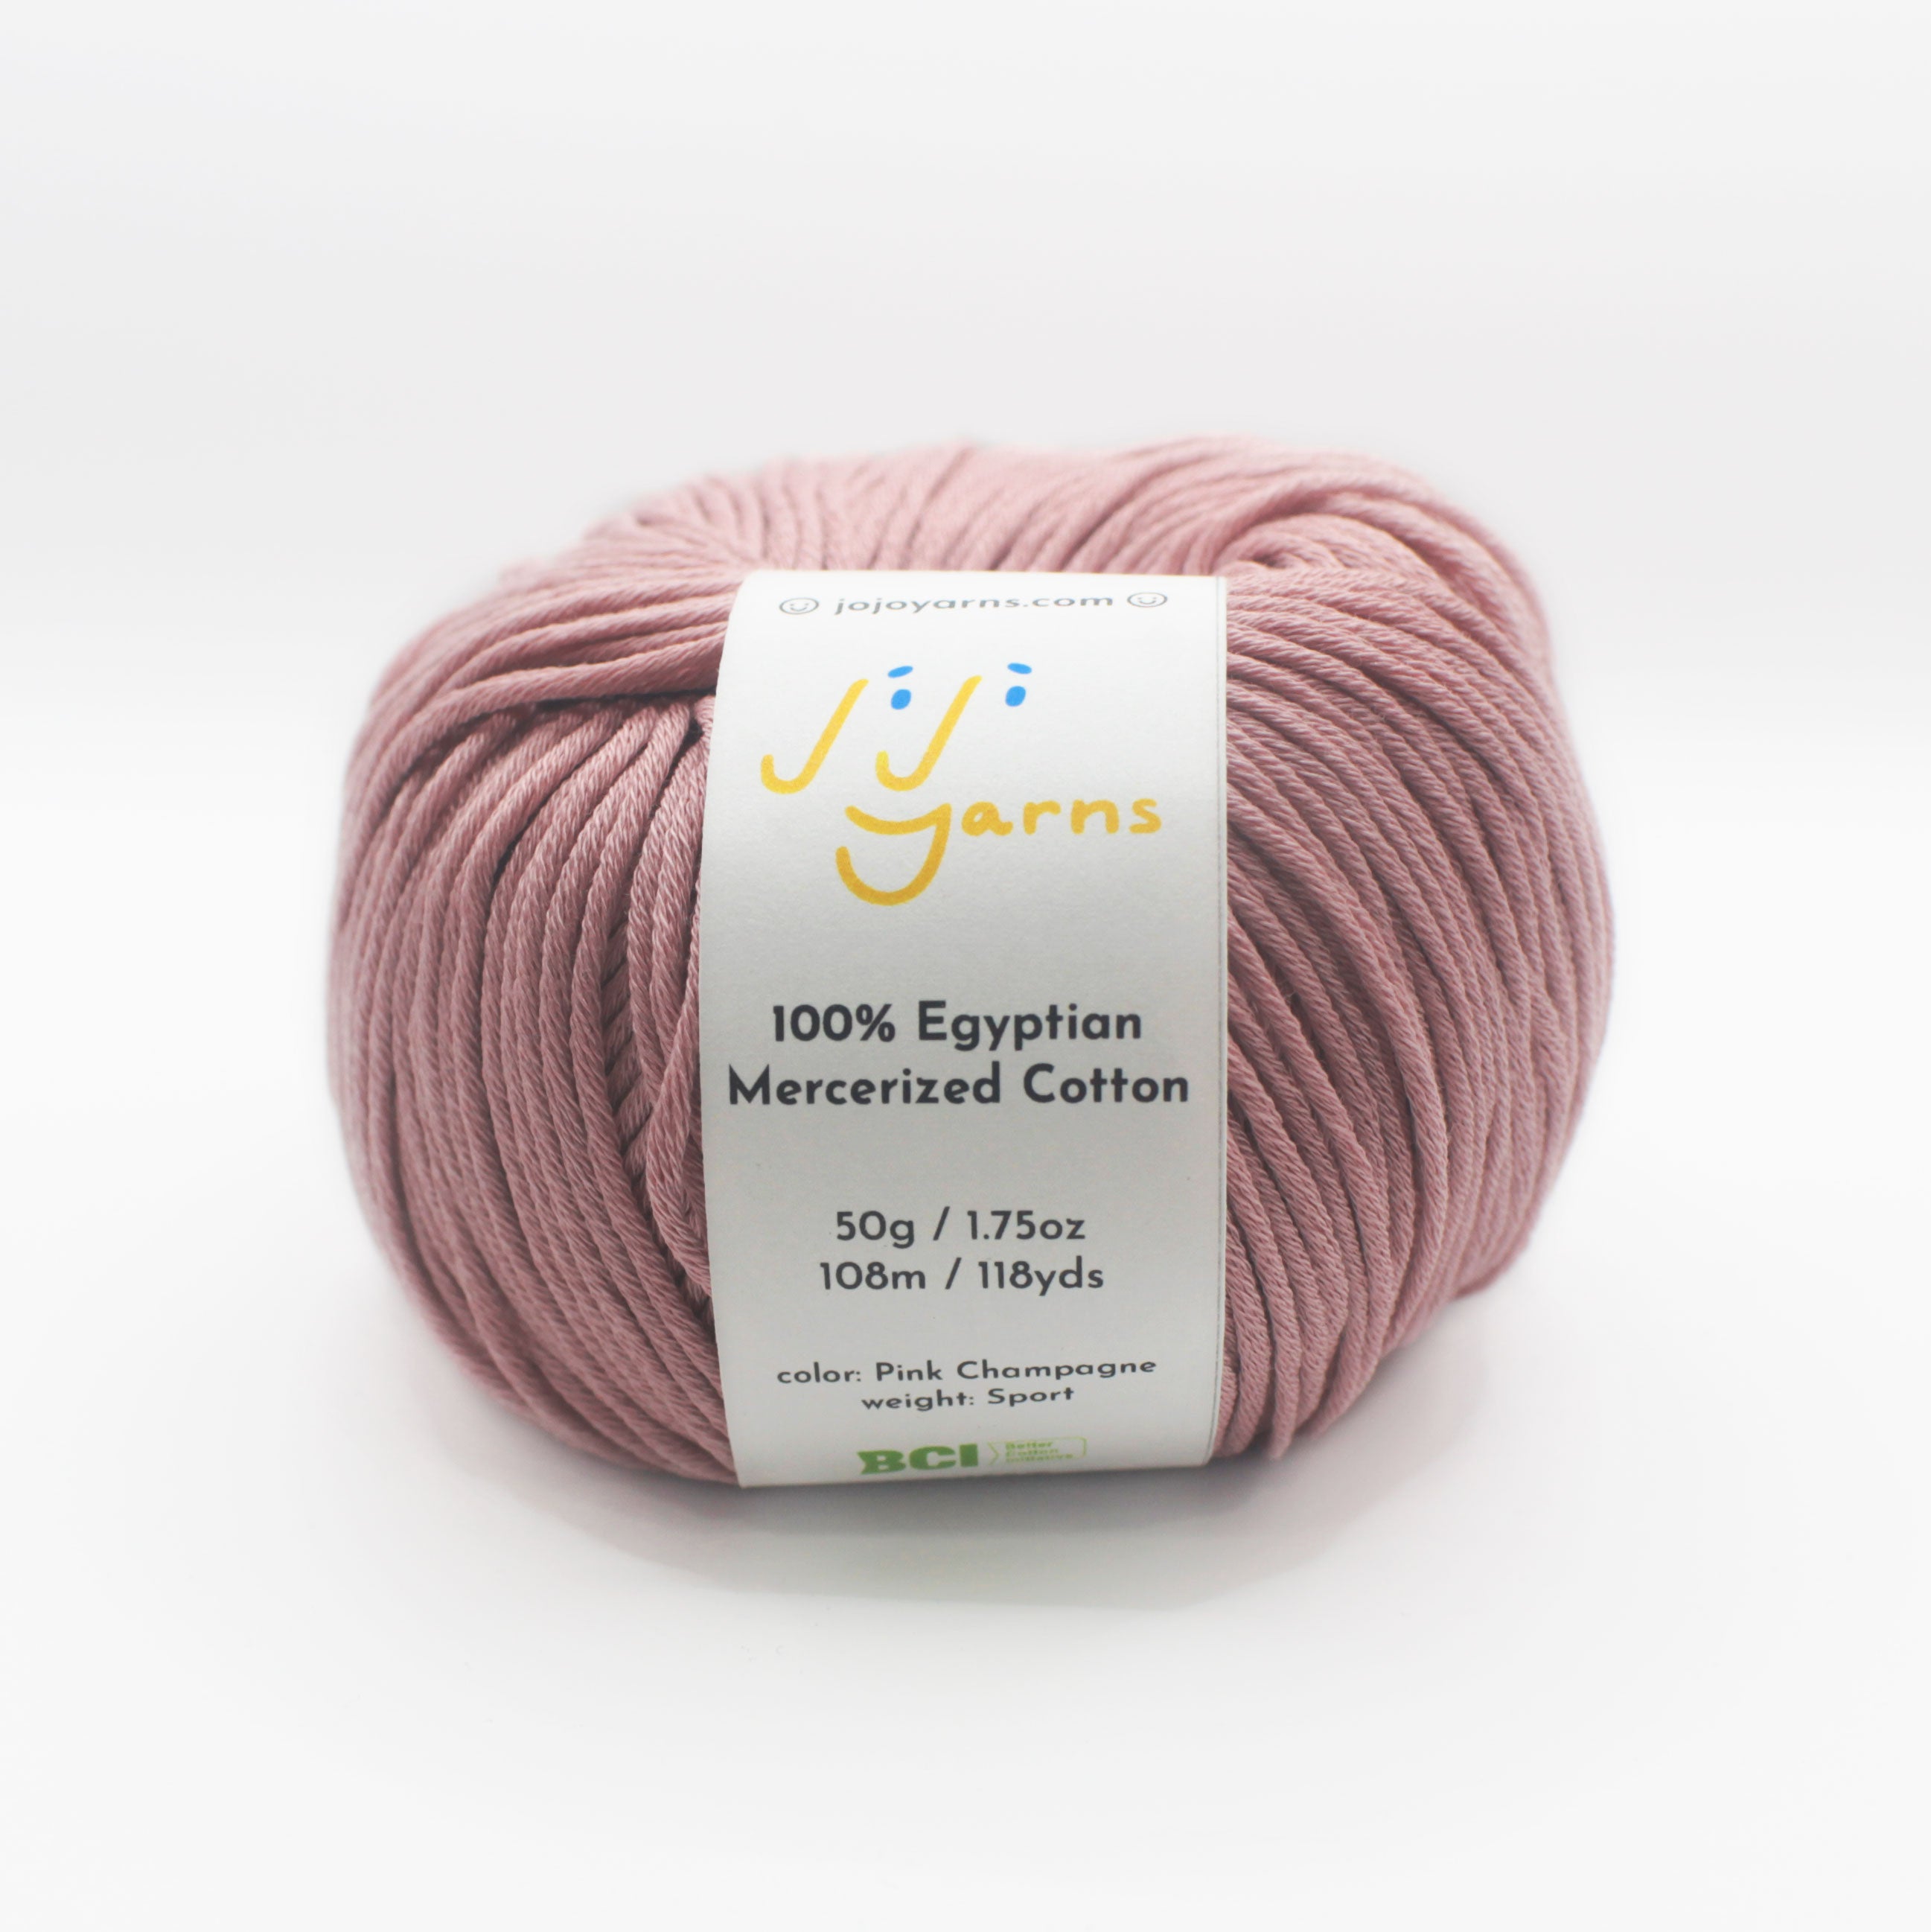 100% Egyptian Mercerized Cotton Yarn in Pink Champagne Sport Weight ...